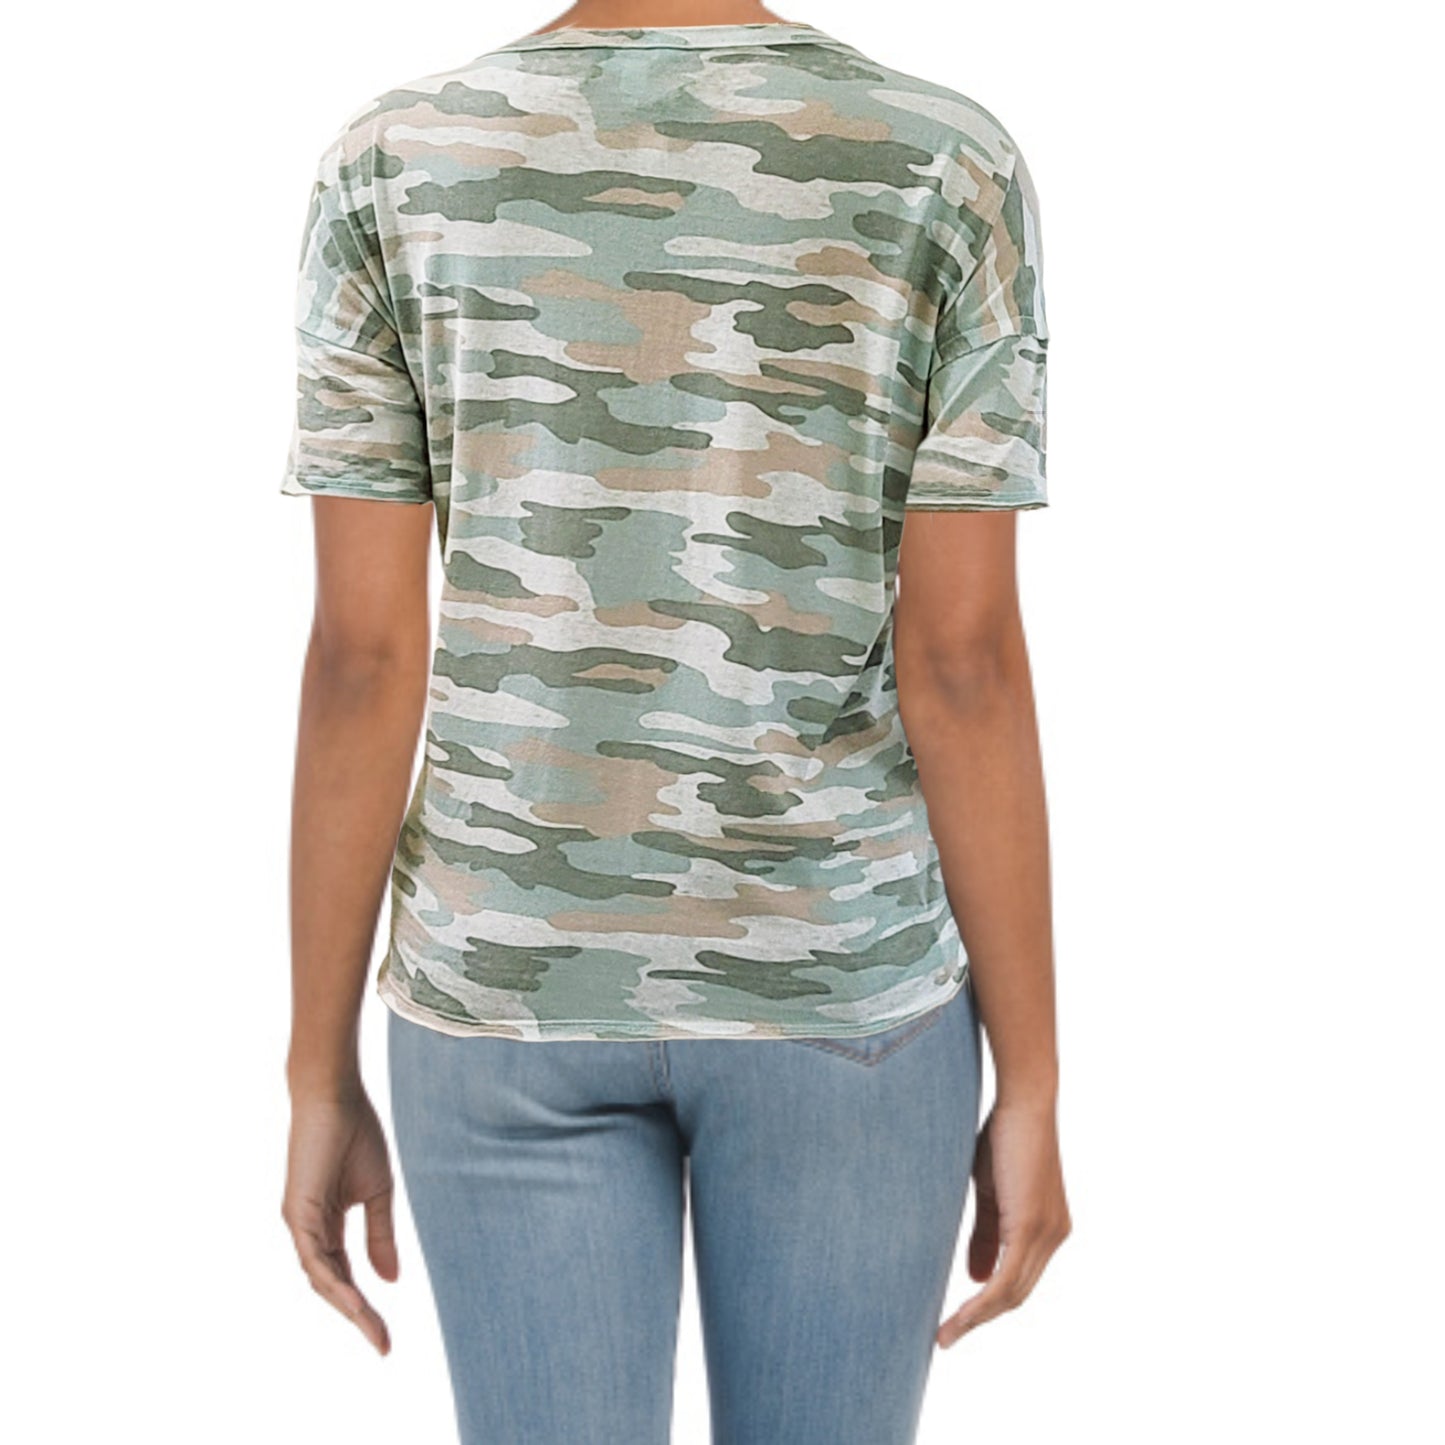 Lucky Brand Camo Print Relaxed Fit Cotton T-Shirt top